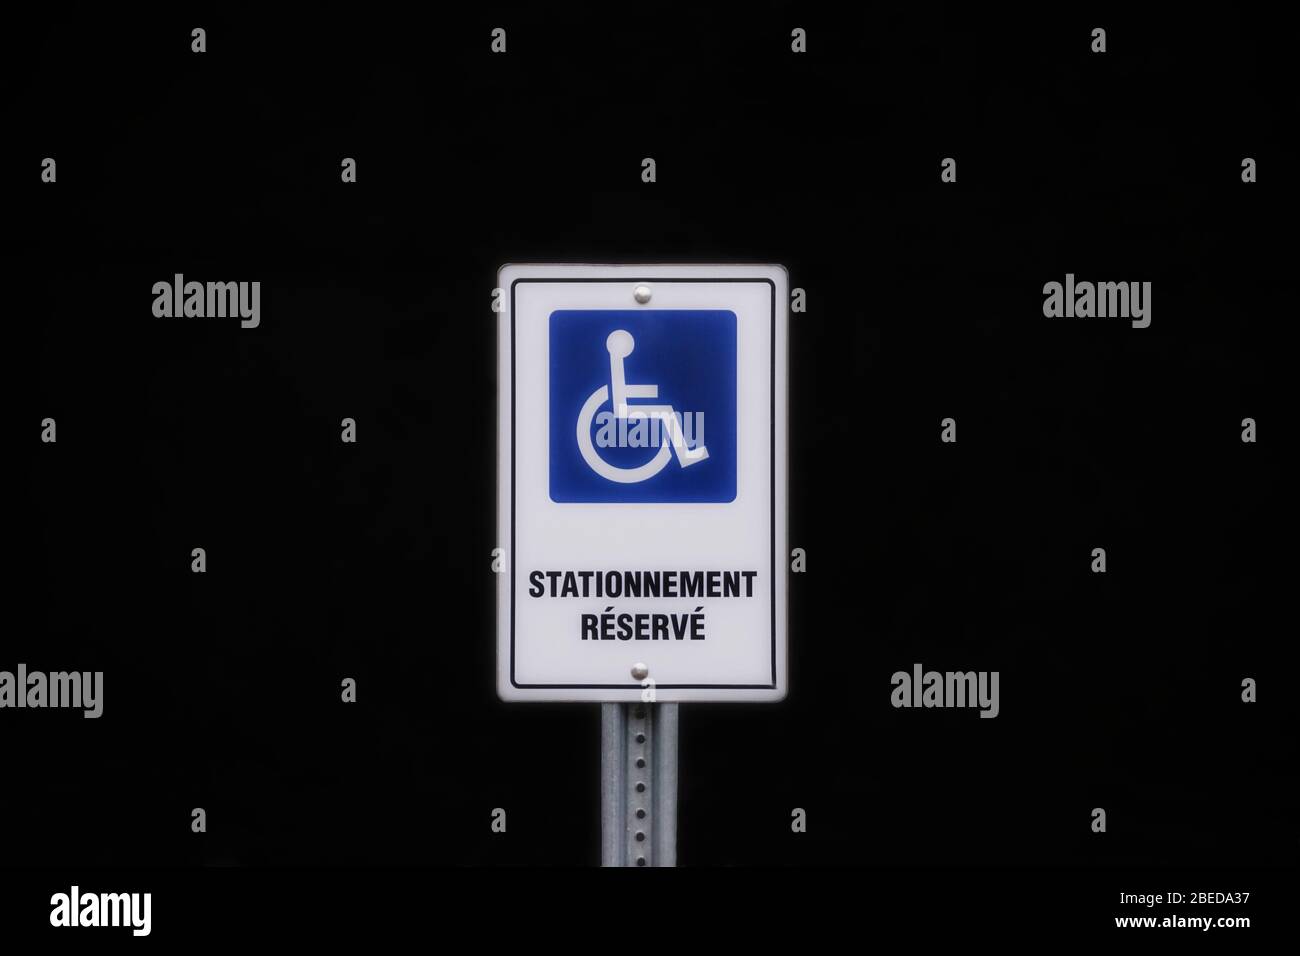 Symbol of handicap disabled parking space on a black background written in french Stock Photo